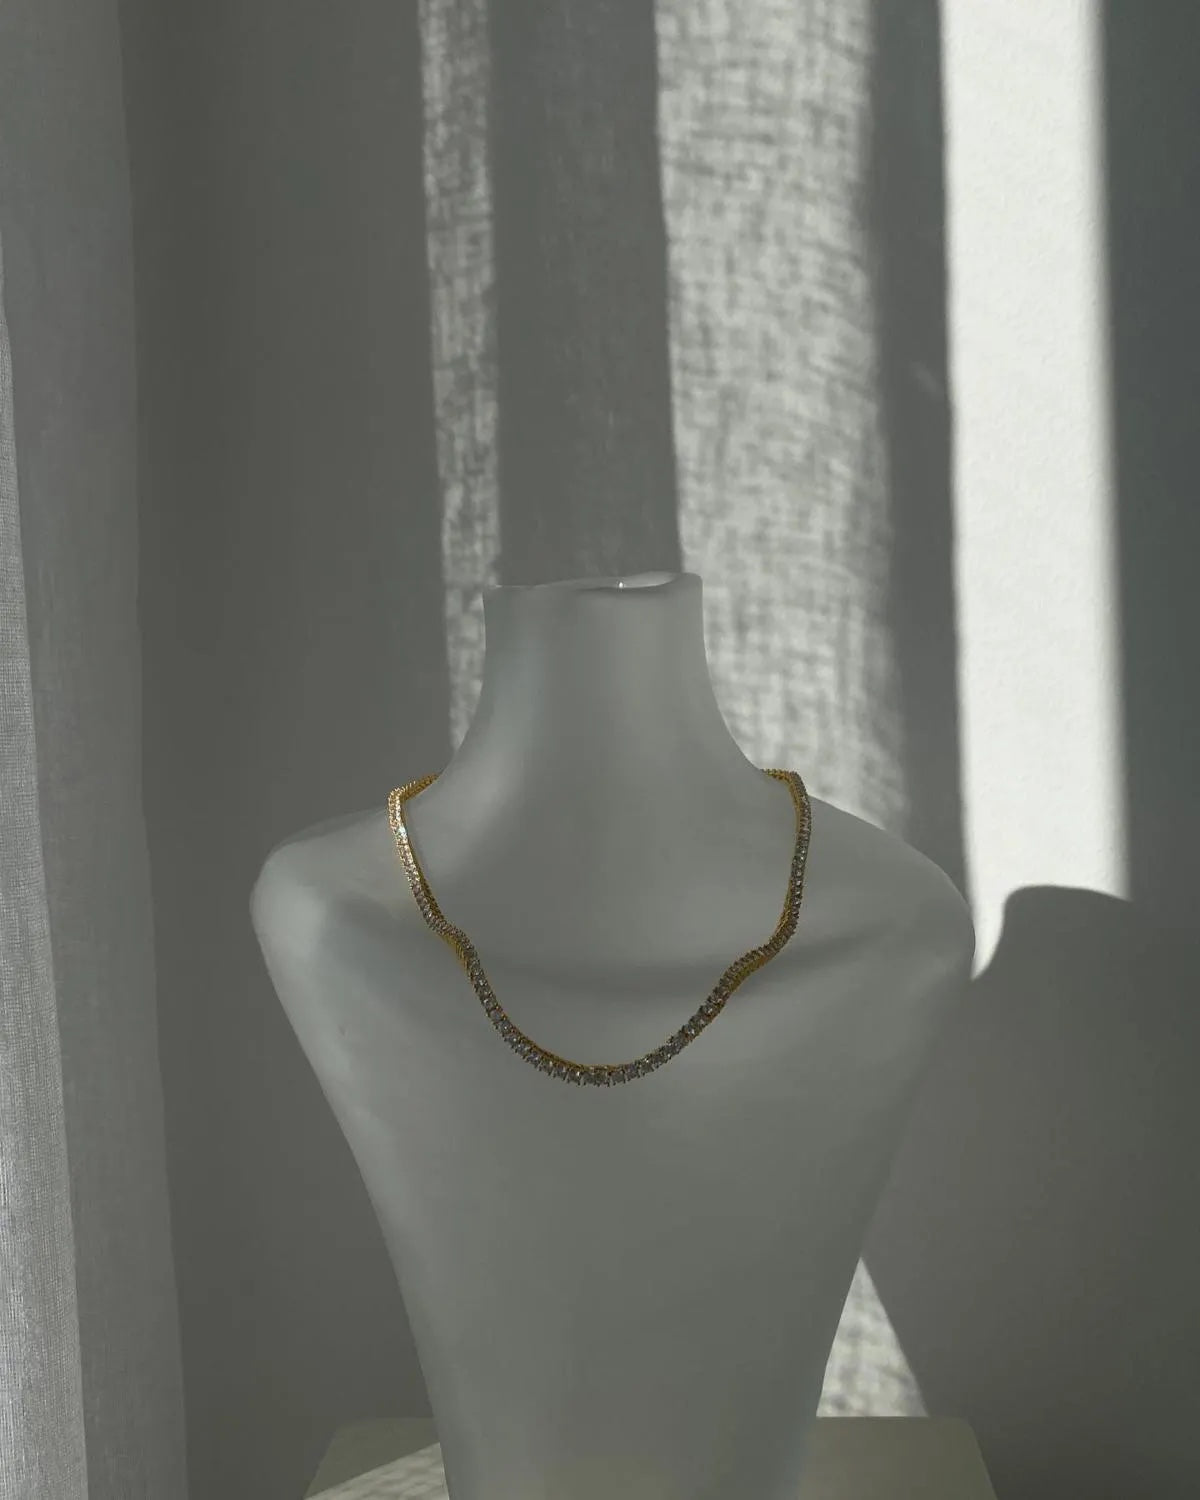 Tennis necklace - gold